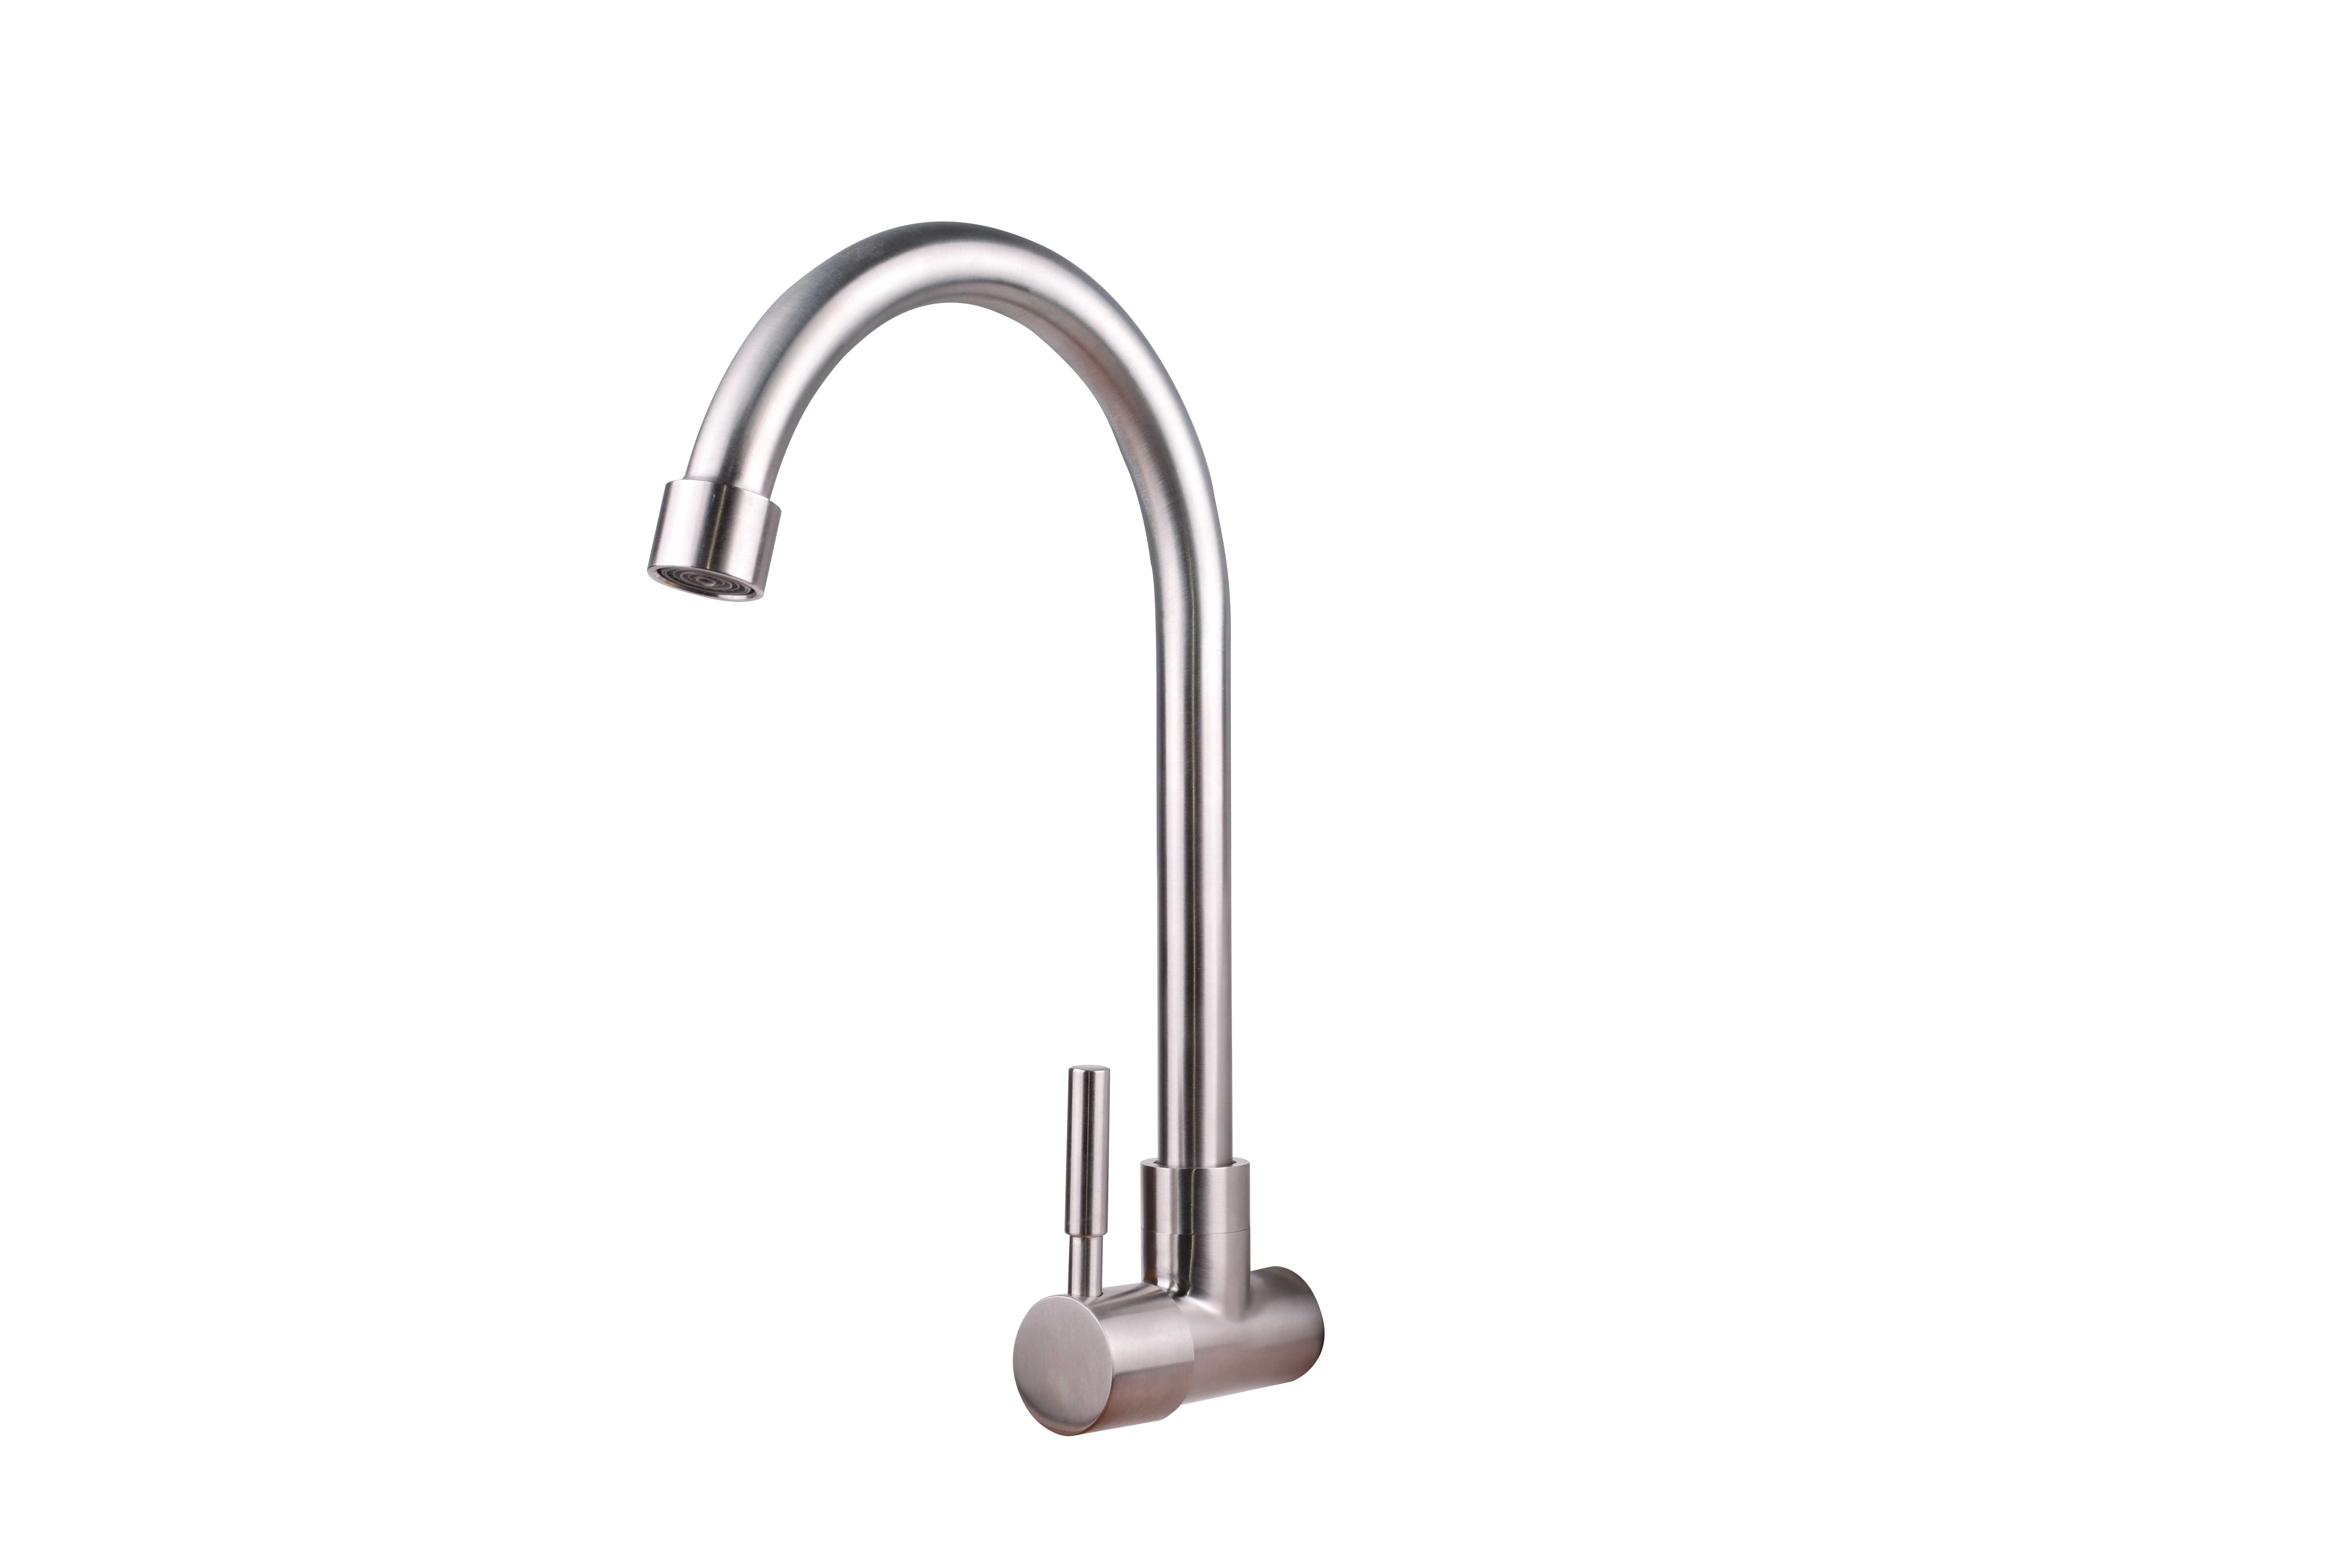 Buying Skills for Kitchen Sink Faucet